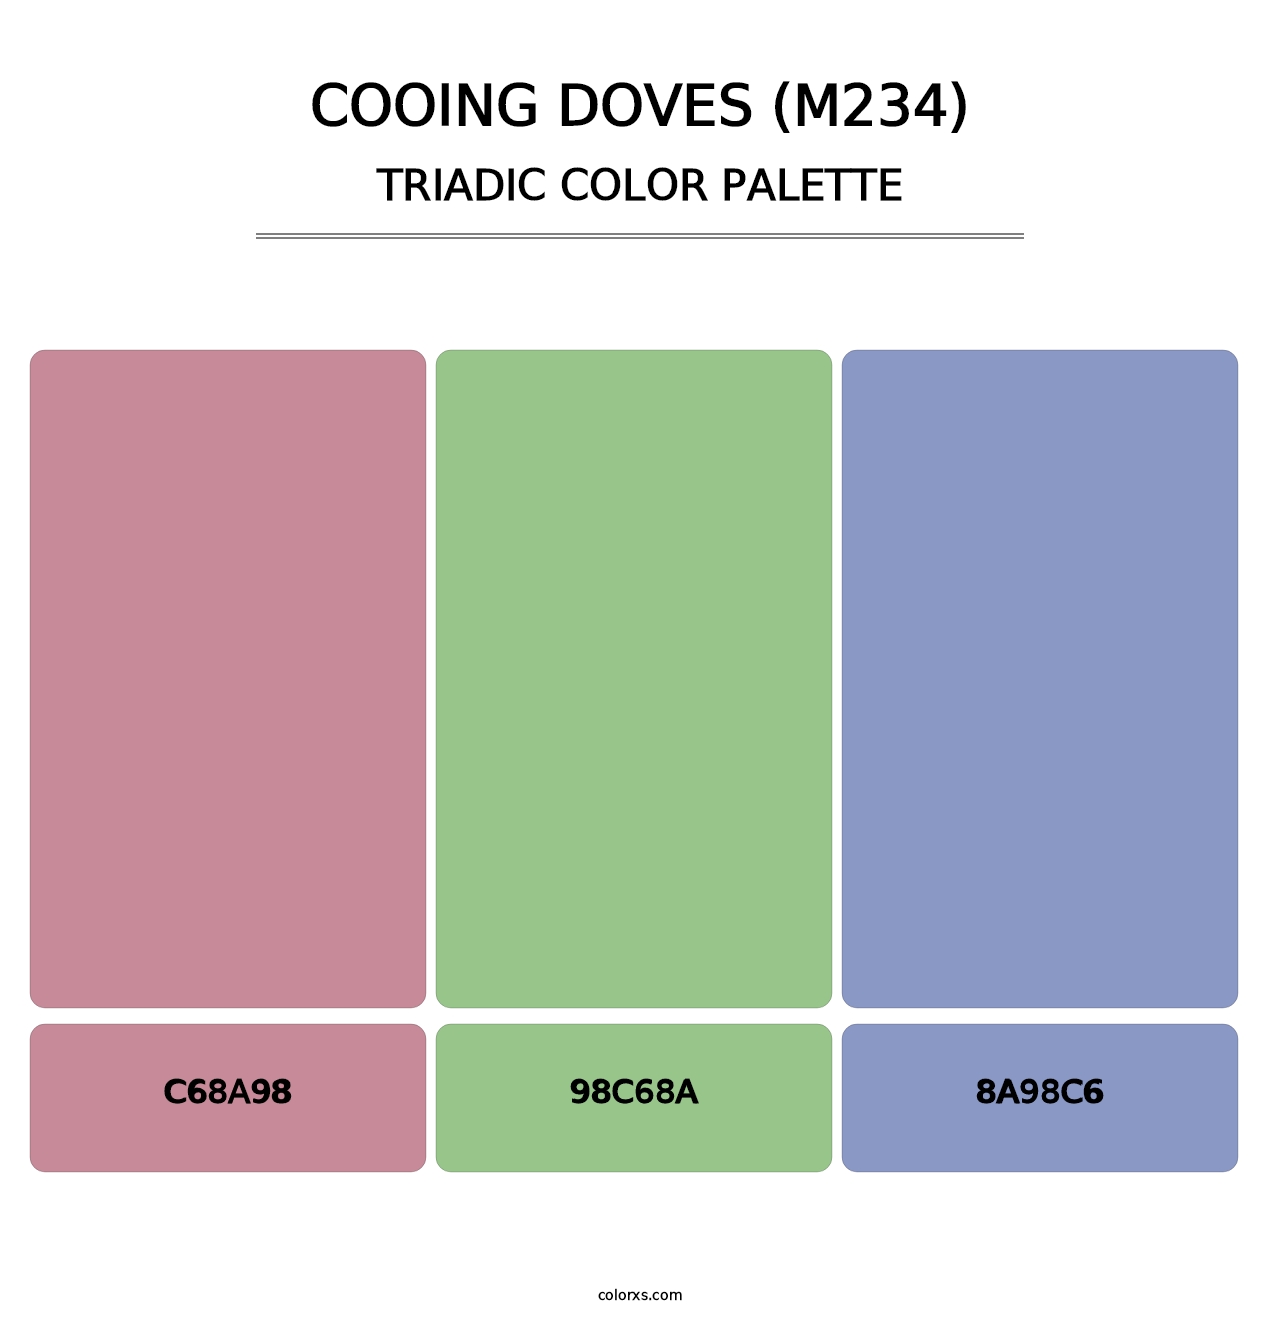 Cooing Doves (M234) - Triadic Color Palette